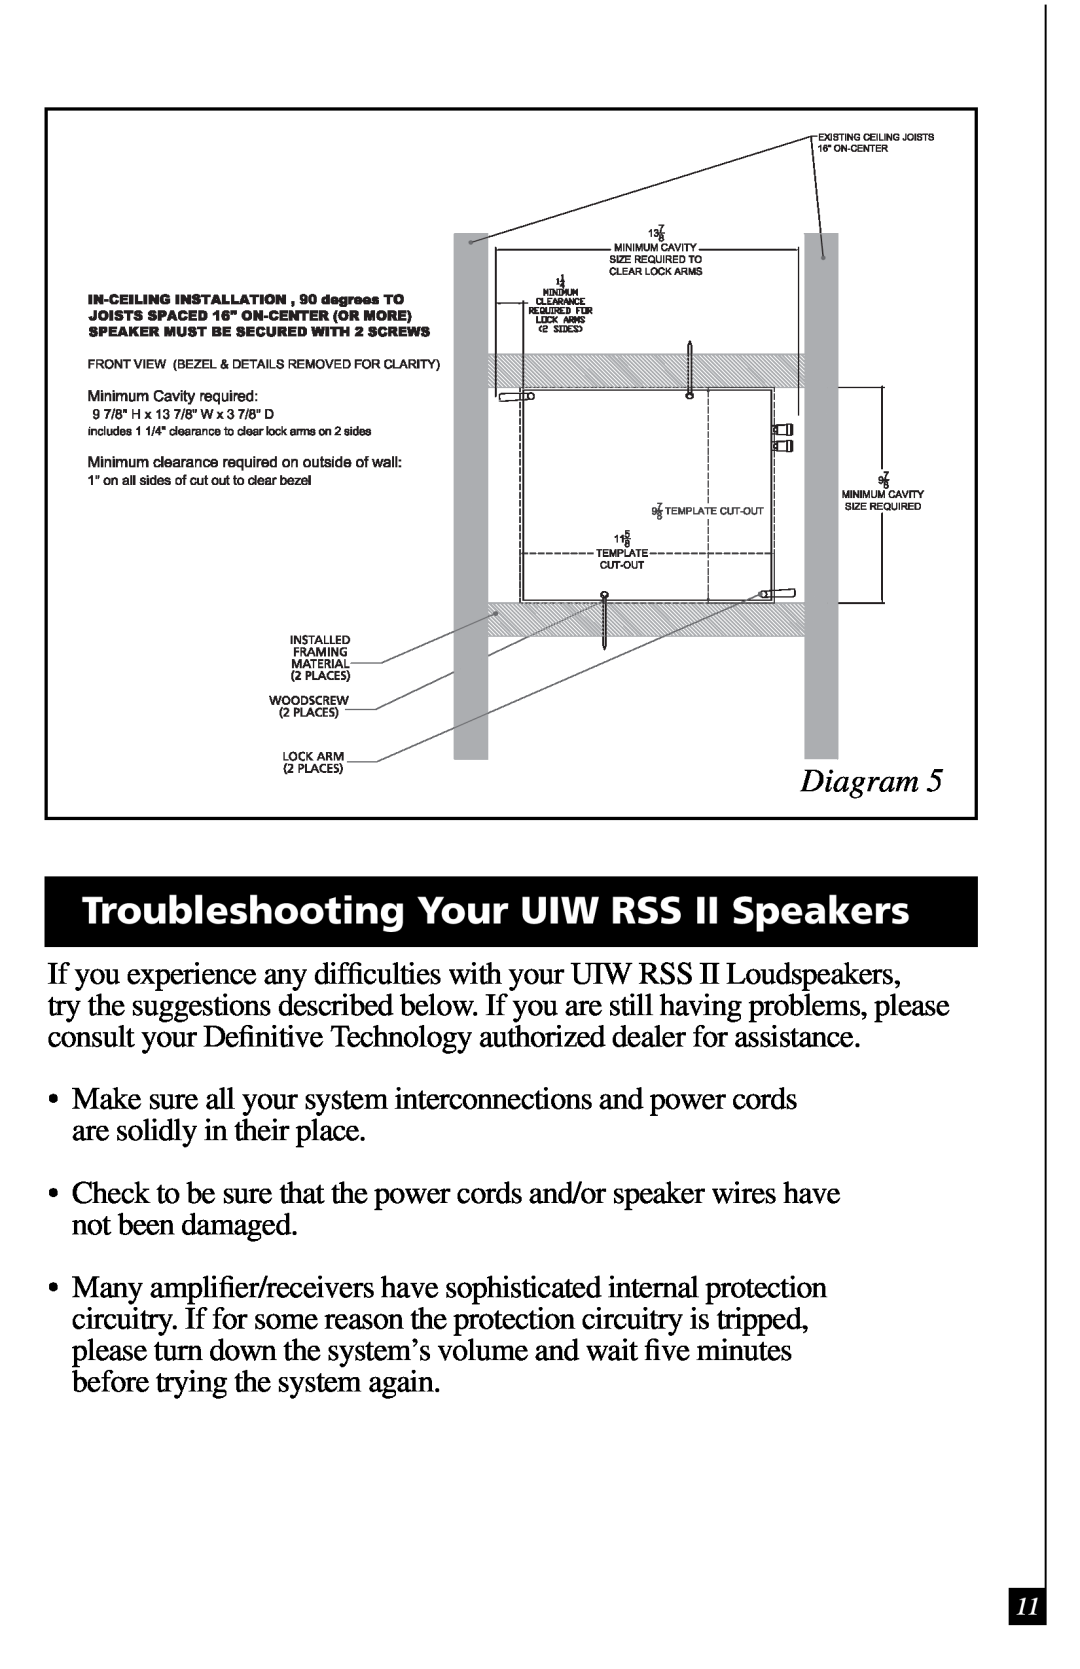 Definitive Technology owner manual Troubleshooting Your UIW RSS II Speakers, Diagram 